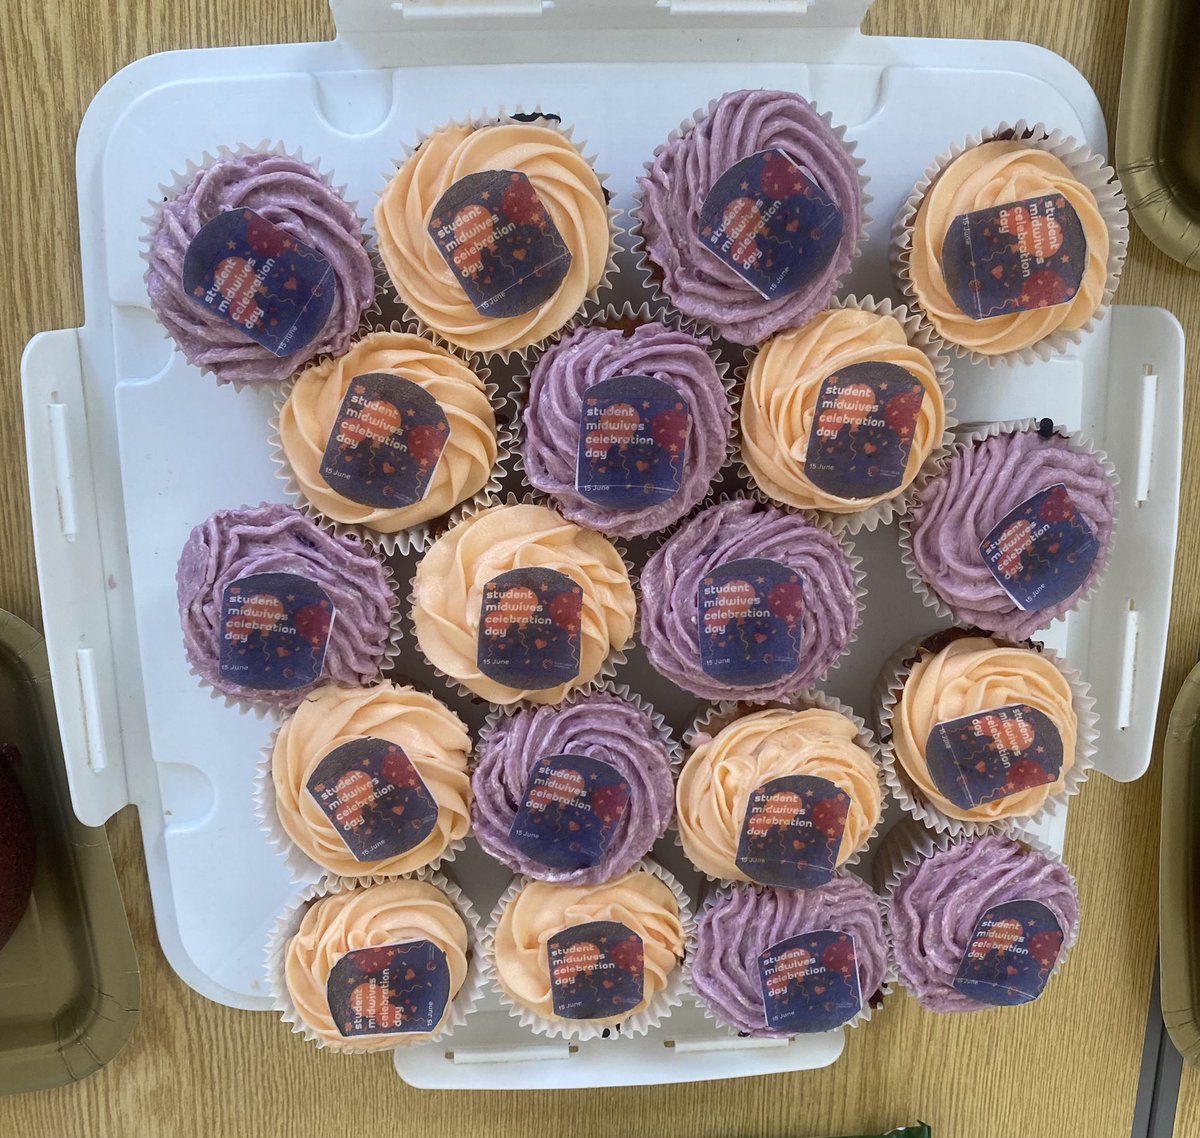 Great celebration with our student midwives @NwangliaftMat sharing event with academics @beccy1percival and Maternity staff @raulbenlloch with llovely cakes baked by @gcq22 @Gillharris1Gill #futuregenerationofmidwives ♥️ #studentmidwiferecognitionday